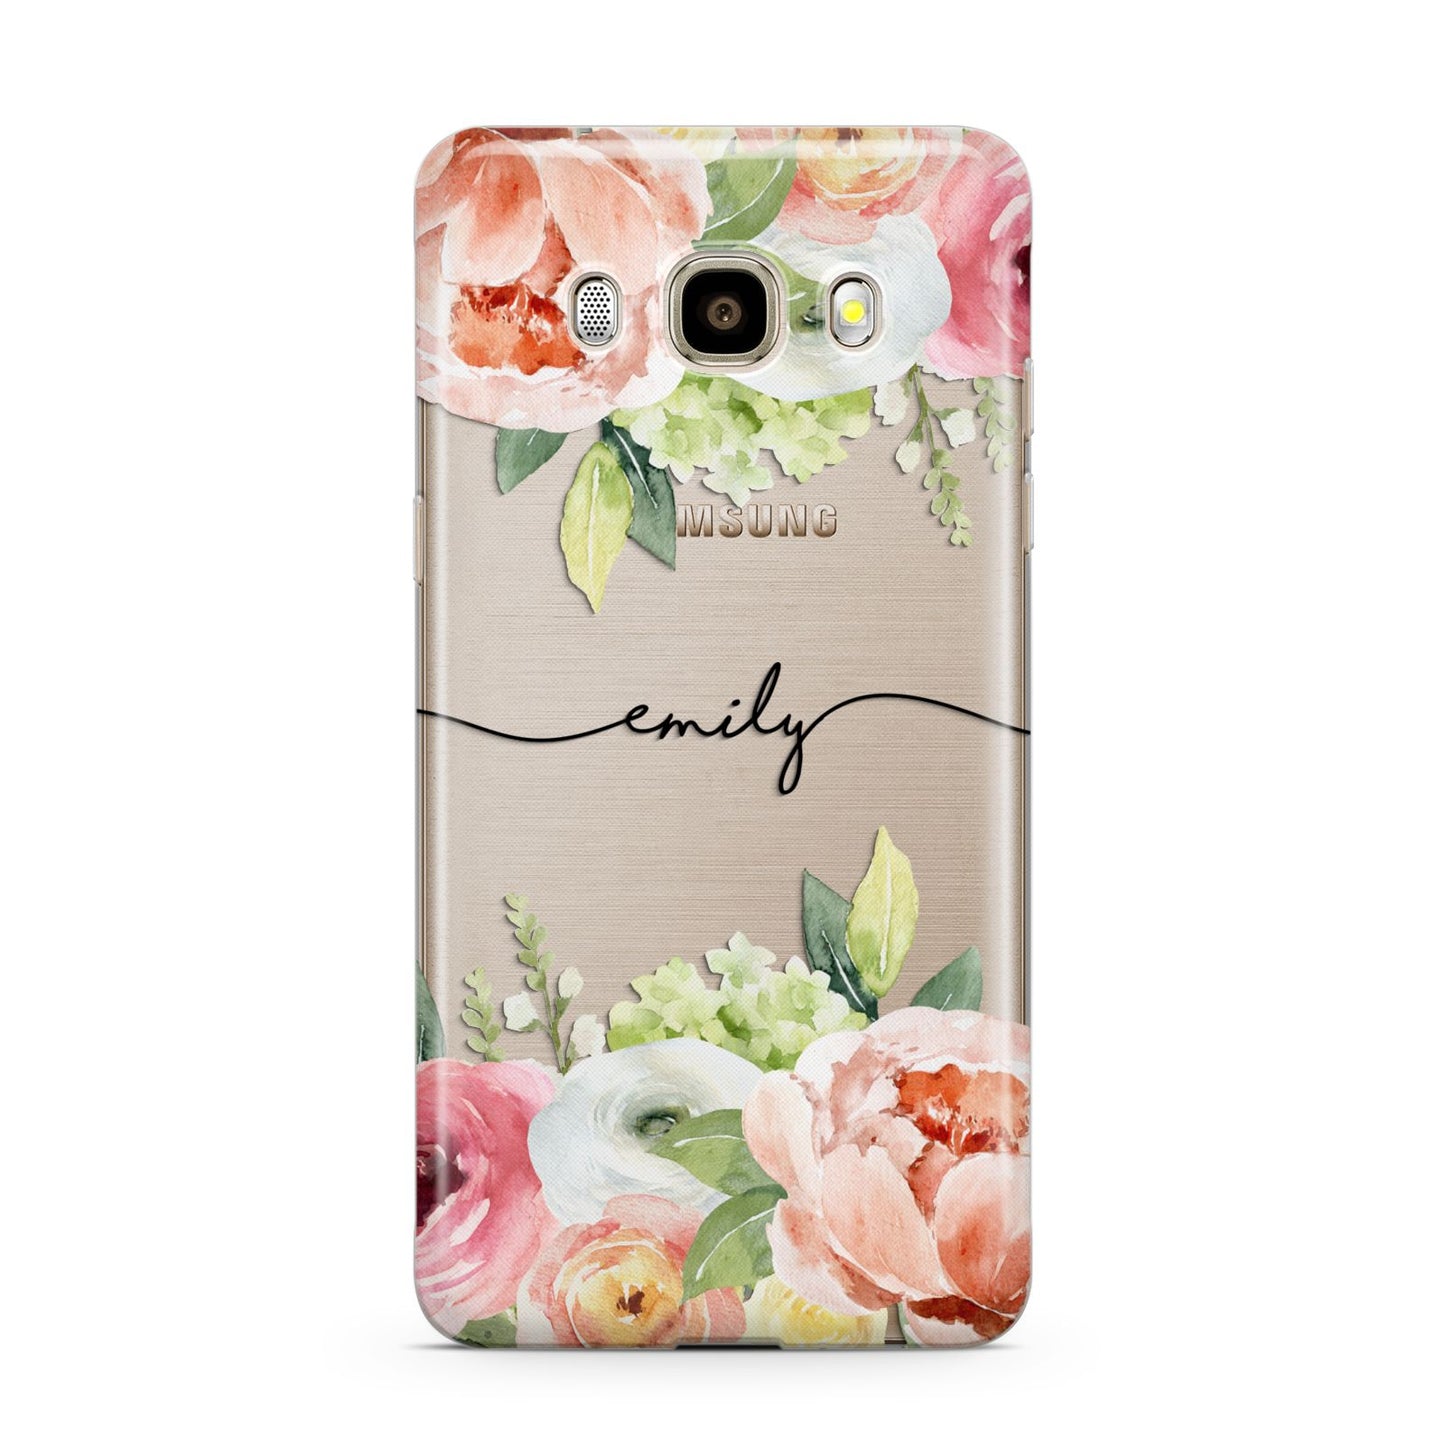 Personalised Flowers Samsung Galaxy J7 2016 Case on gold phone